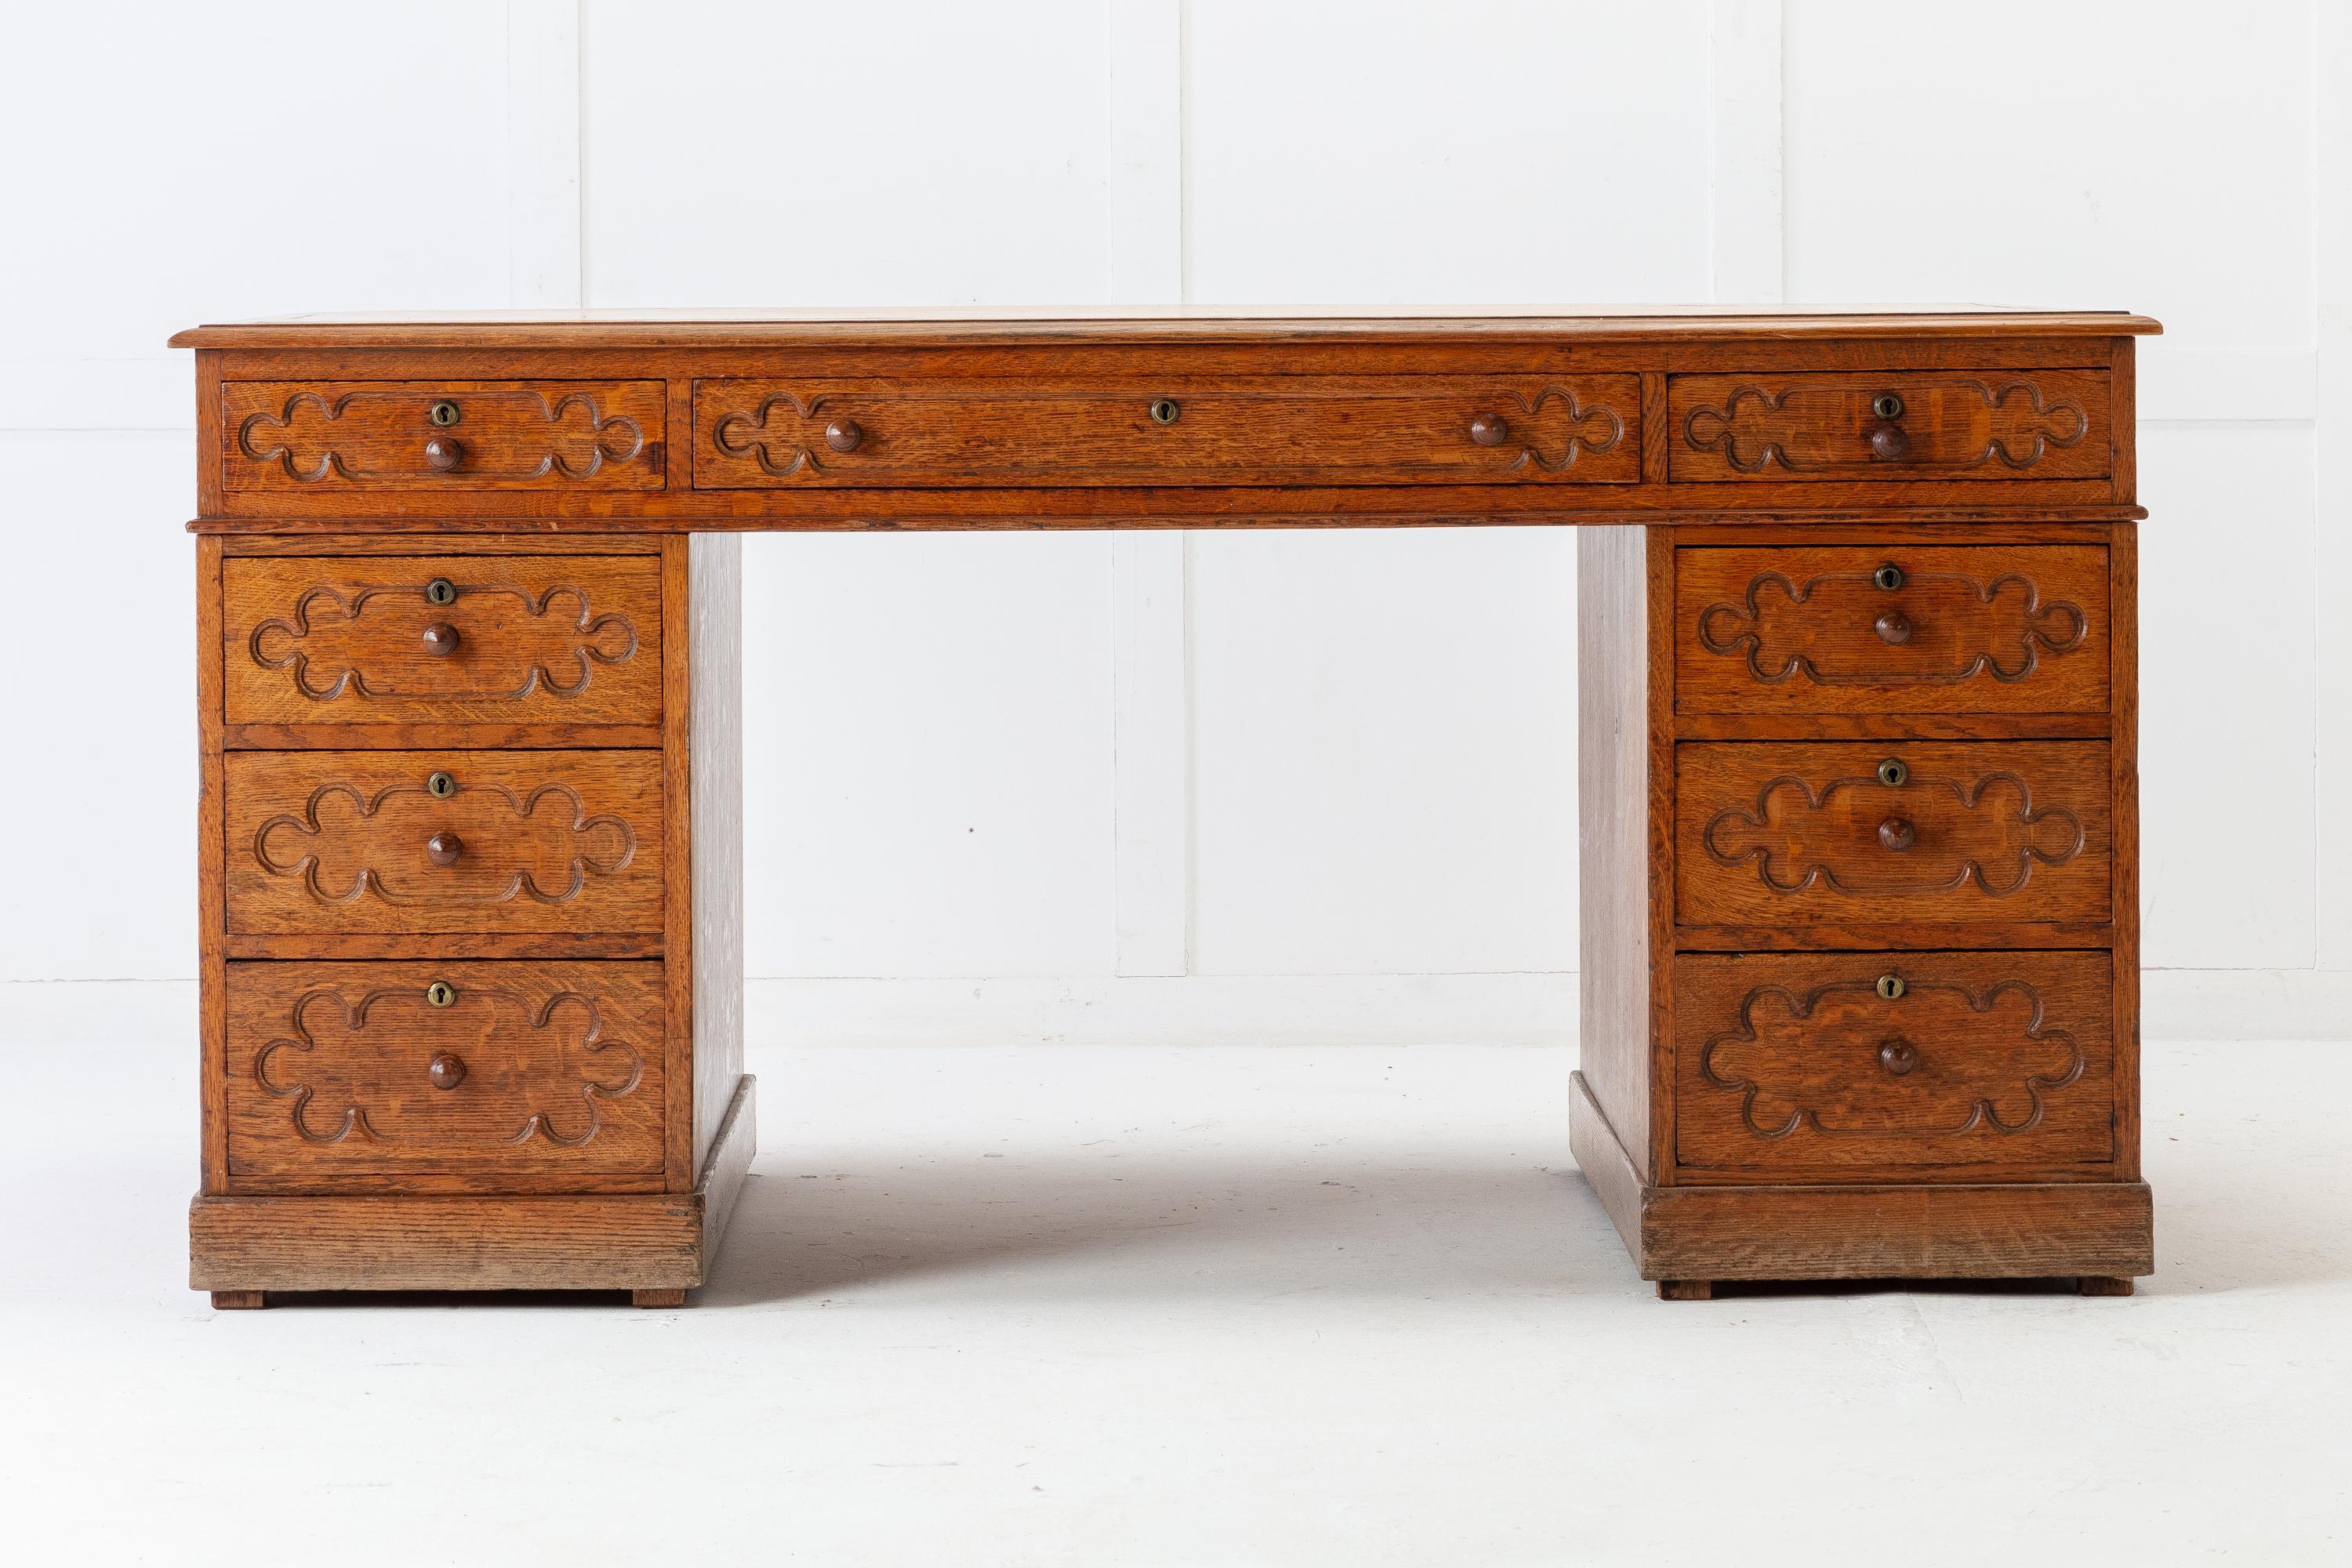 19th century English Regency, oak partners desk with very simple gothic decoration. Three drawers across the top and a quality, old, beige tooled leather writing surface. Rising from a plinth base. Drawers to one side and cupboard doors to the